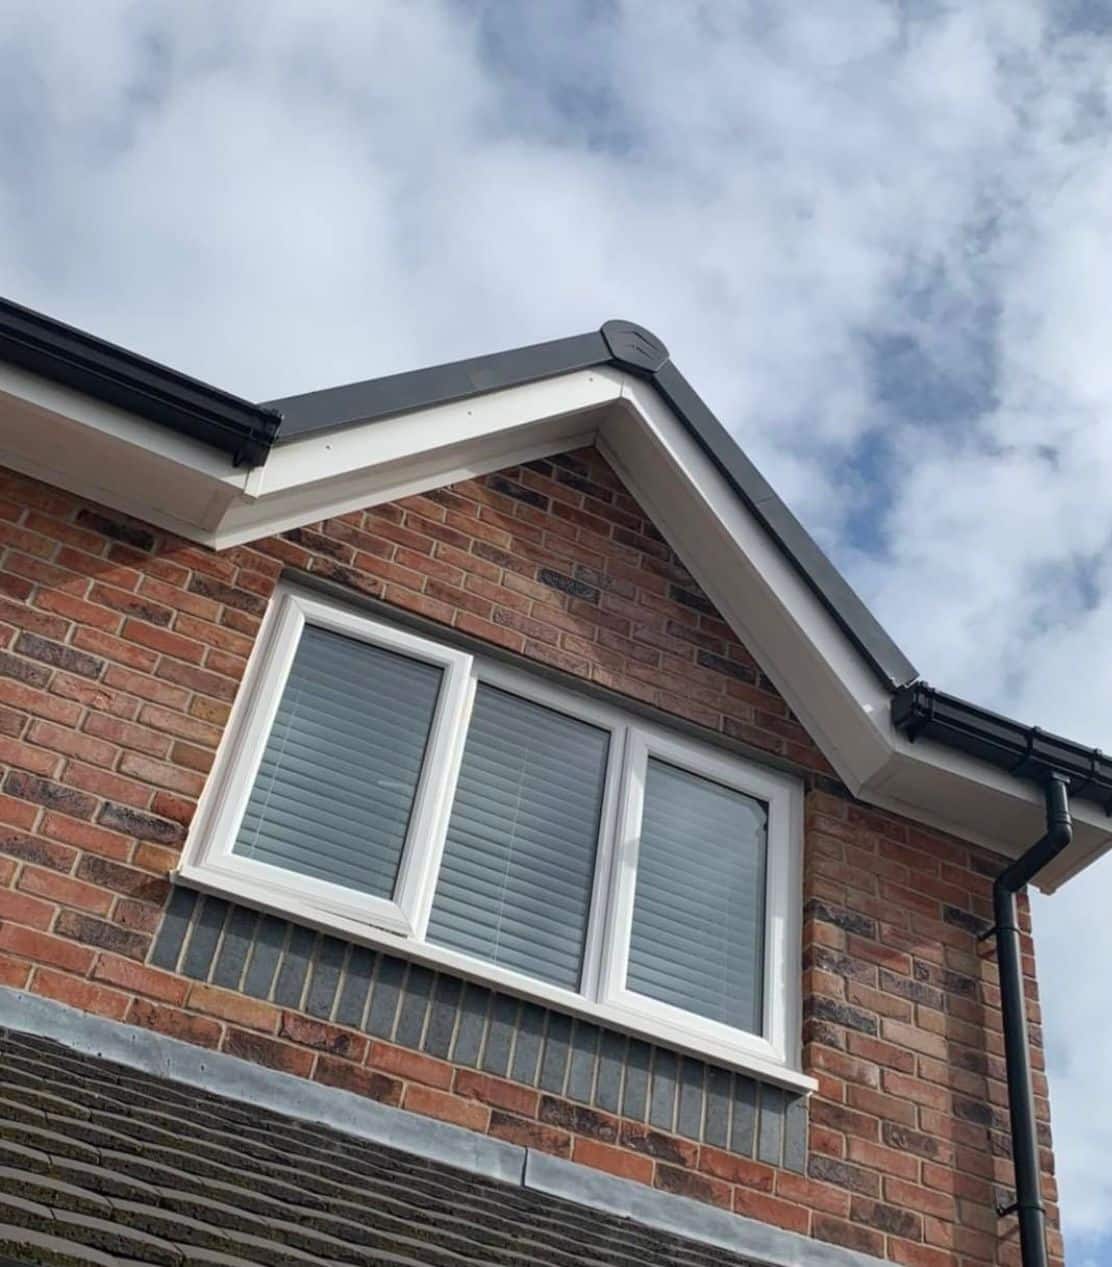 Gutters, Fascias, Soffits Contractors Redbrook, SY13 - DD Roofing